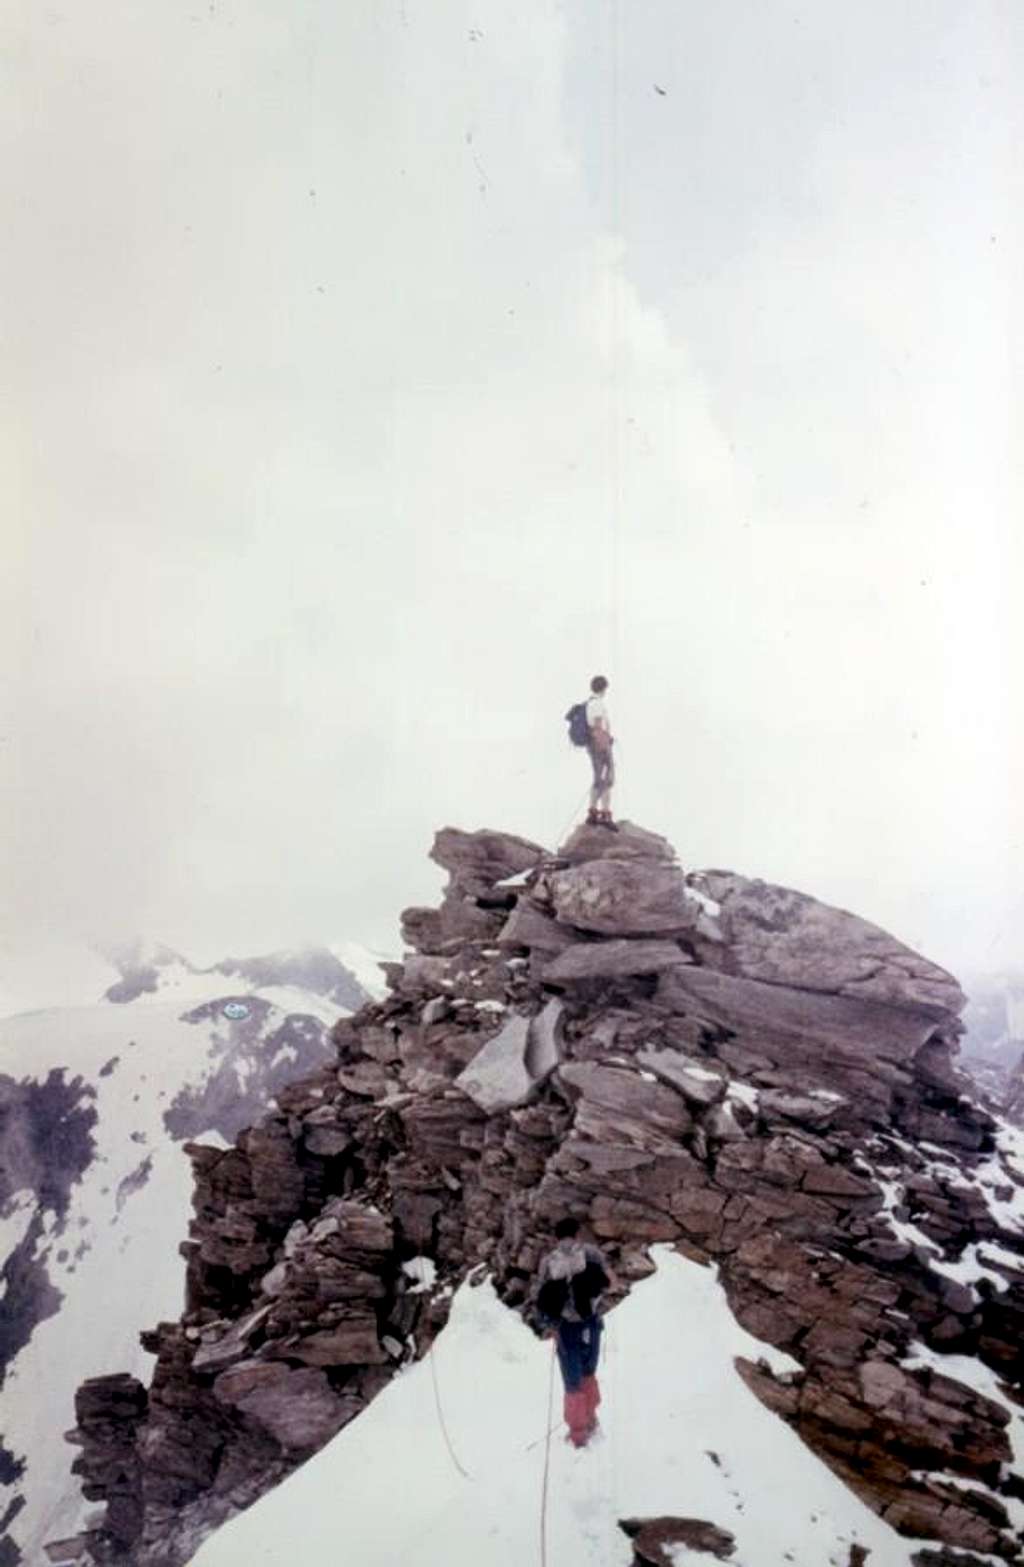 Grande Rousse complete Traverse To little tower 1980